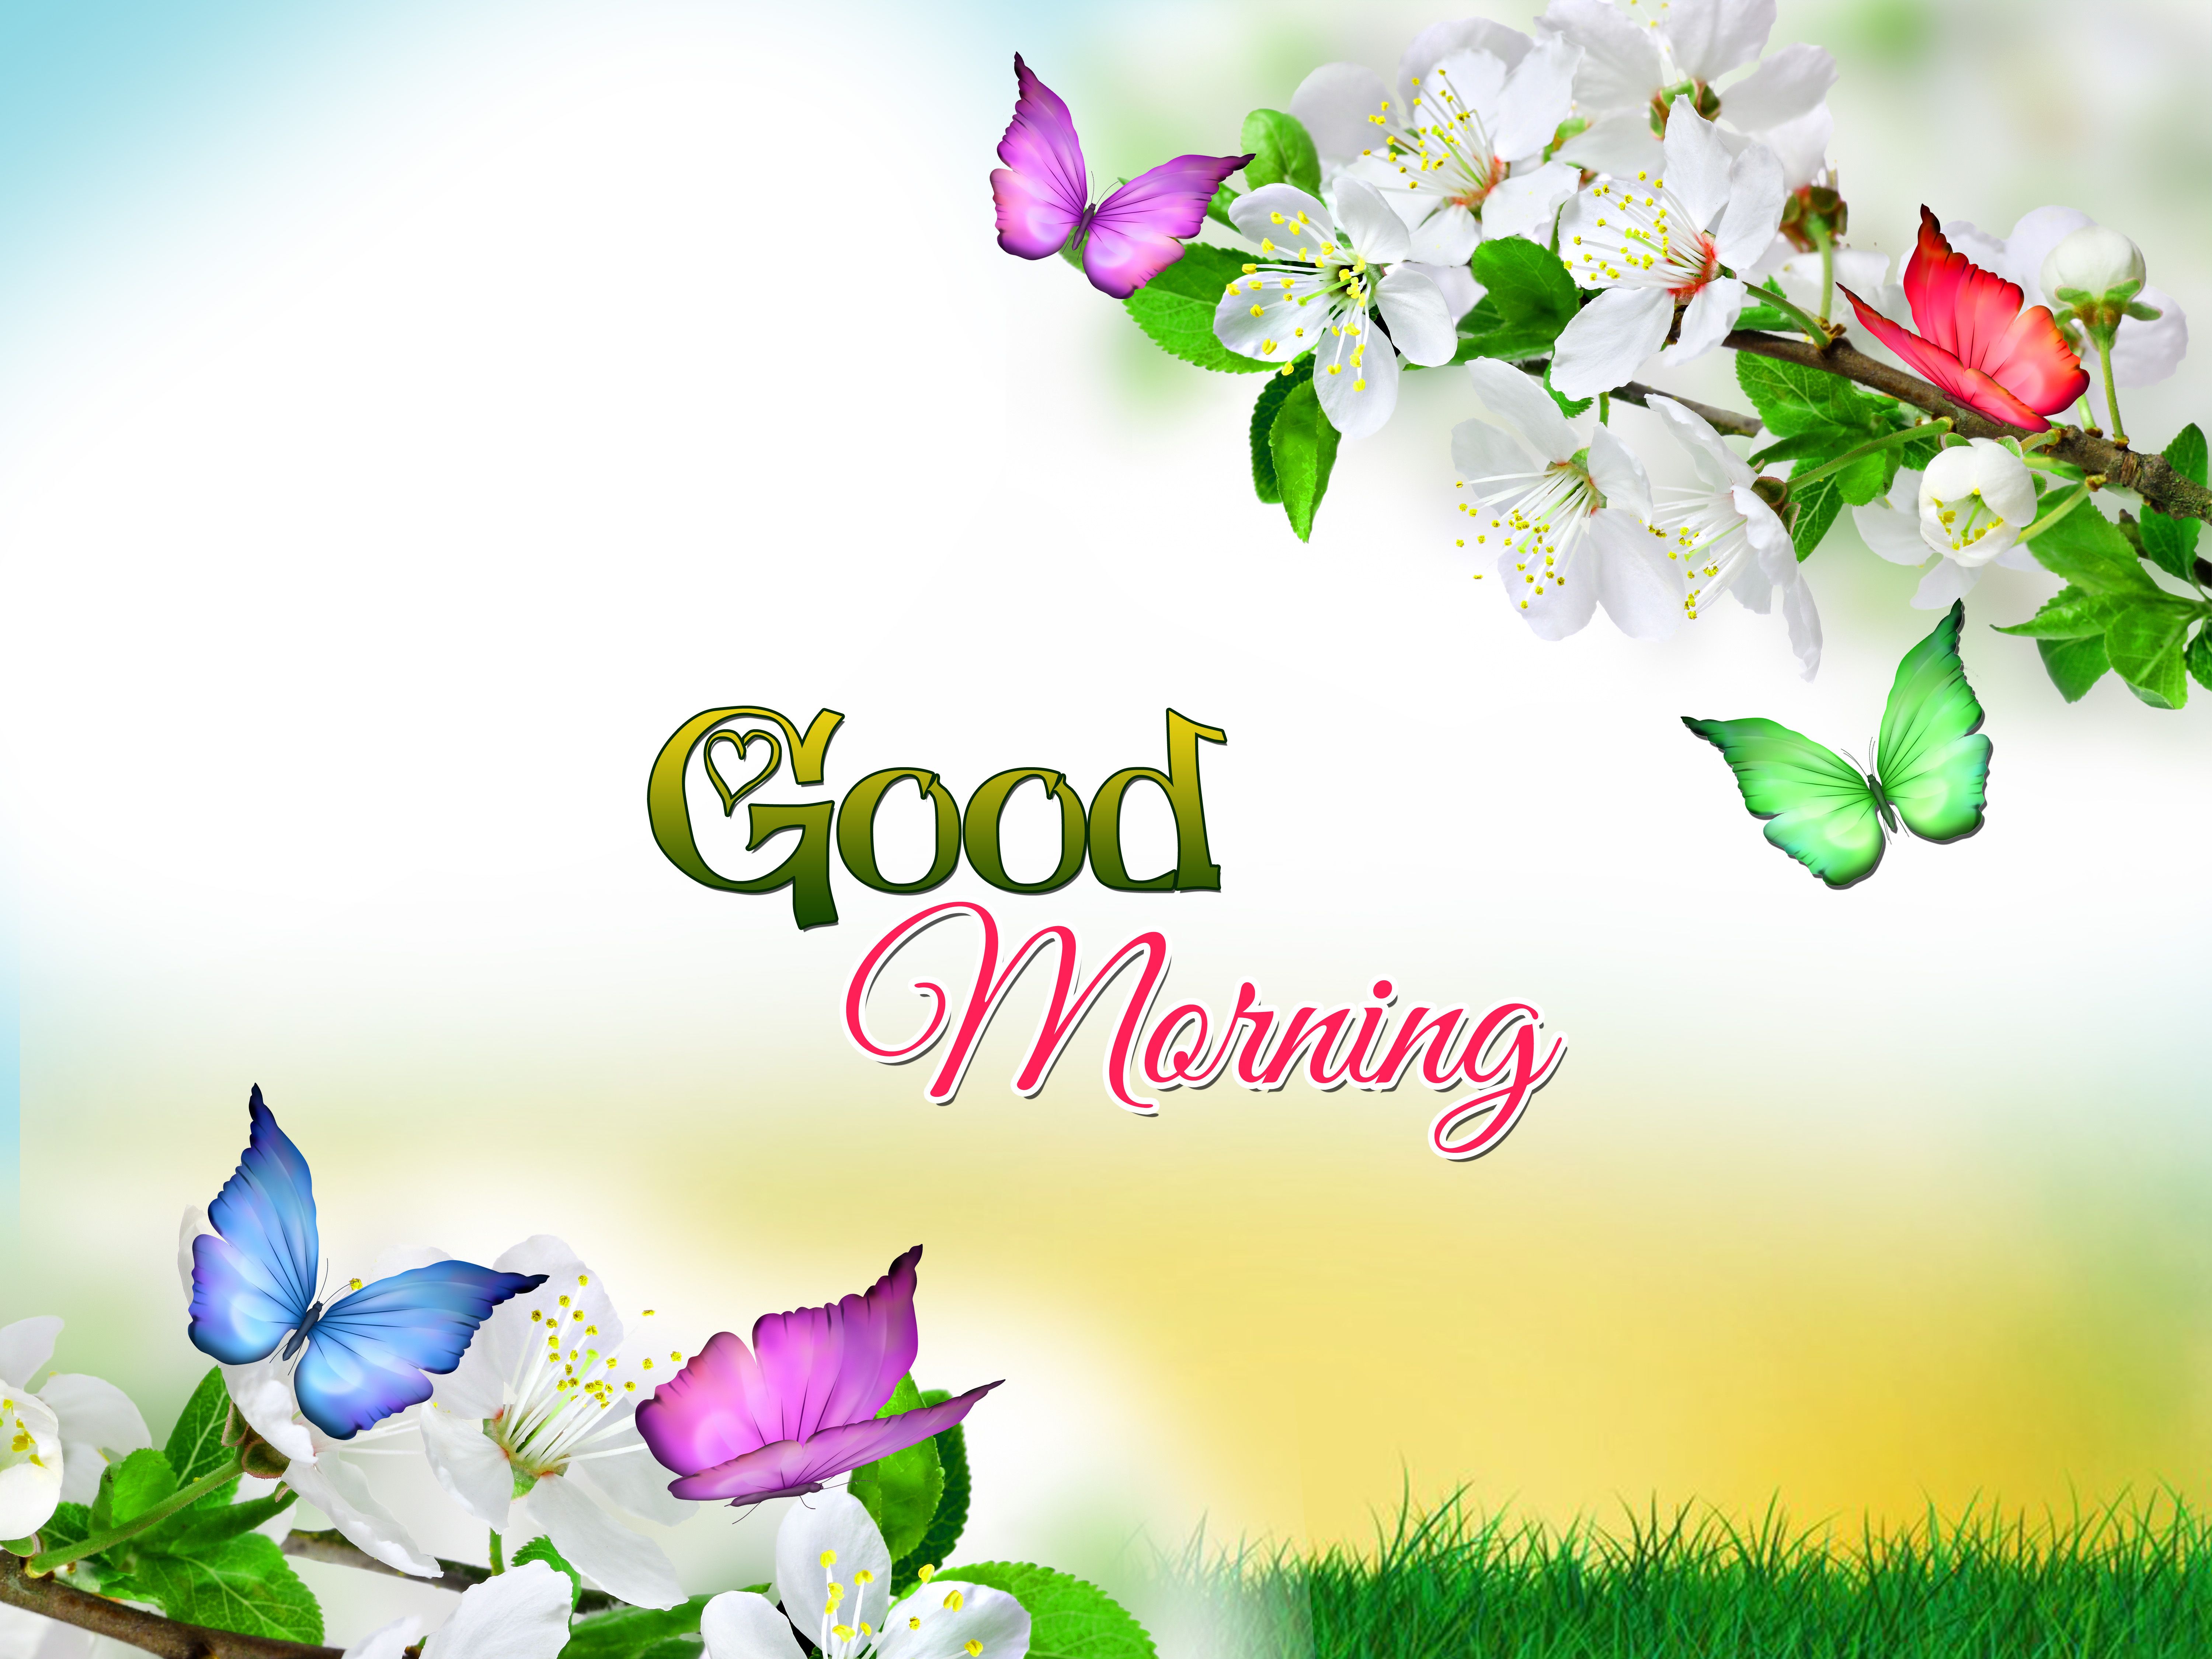 Good Morning Images Wallpapers - Wallpaper Cave